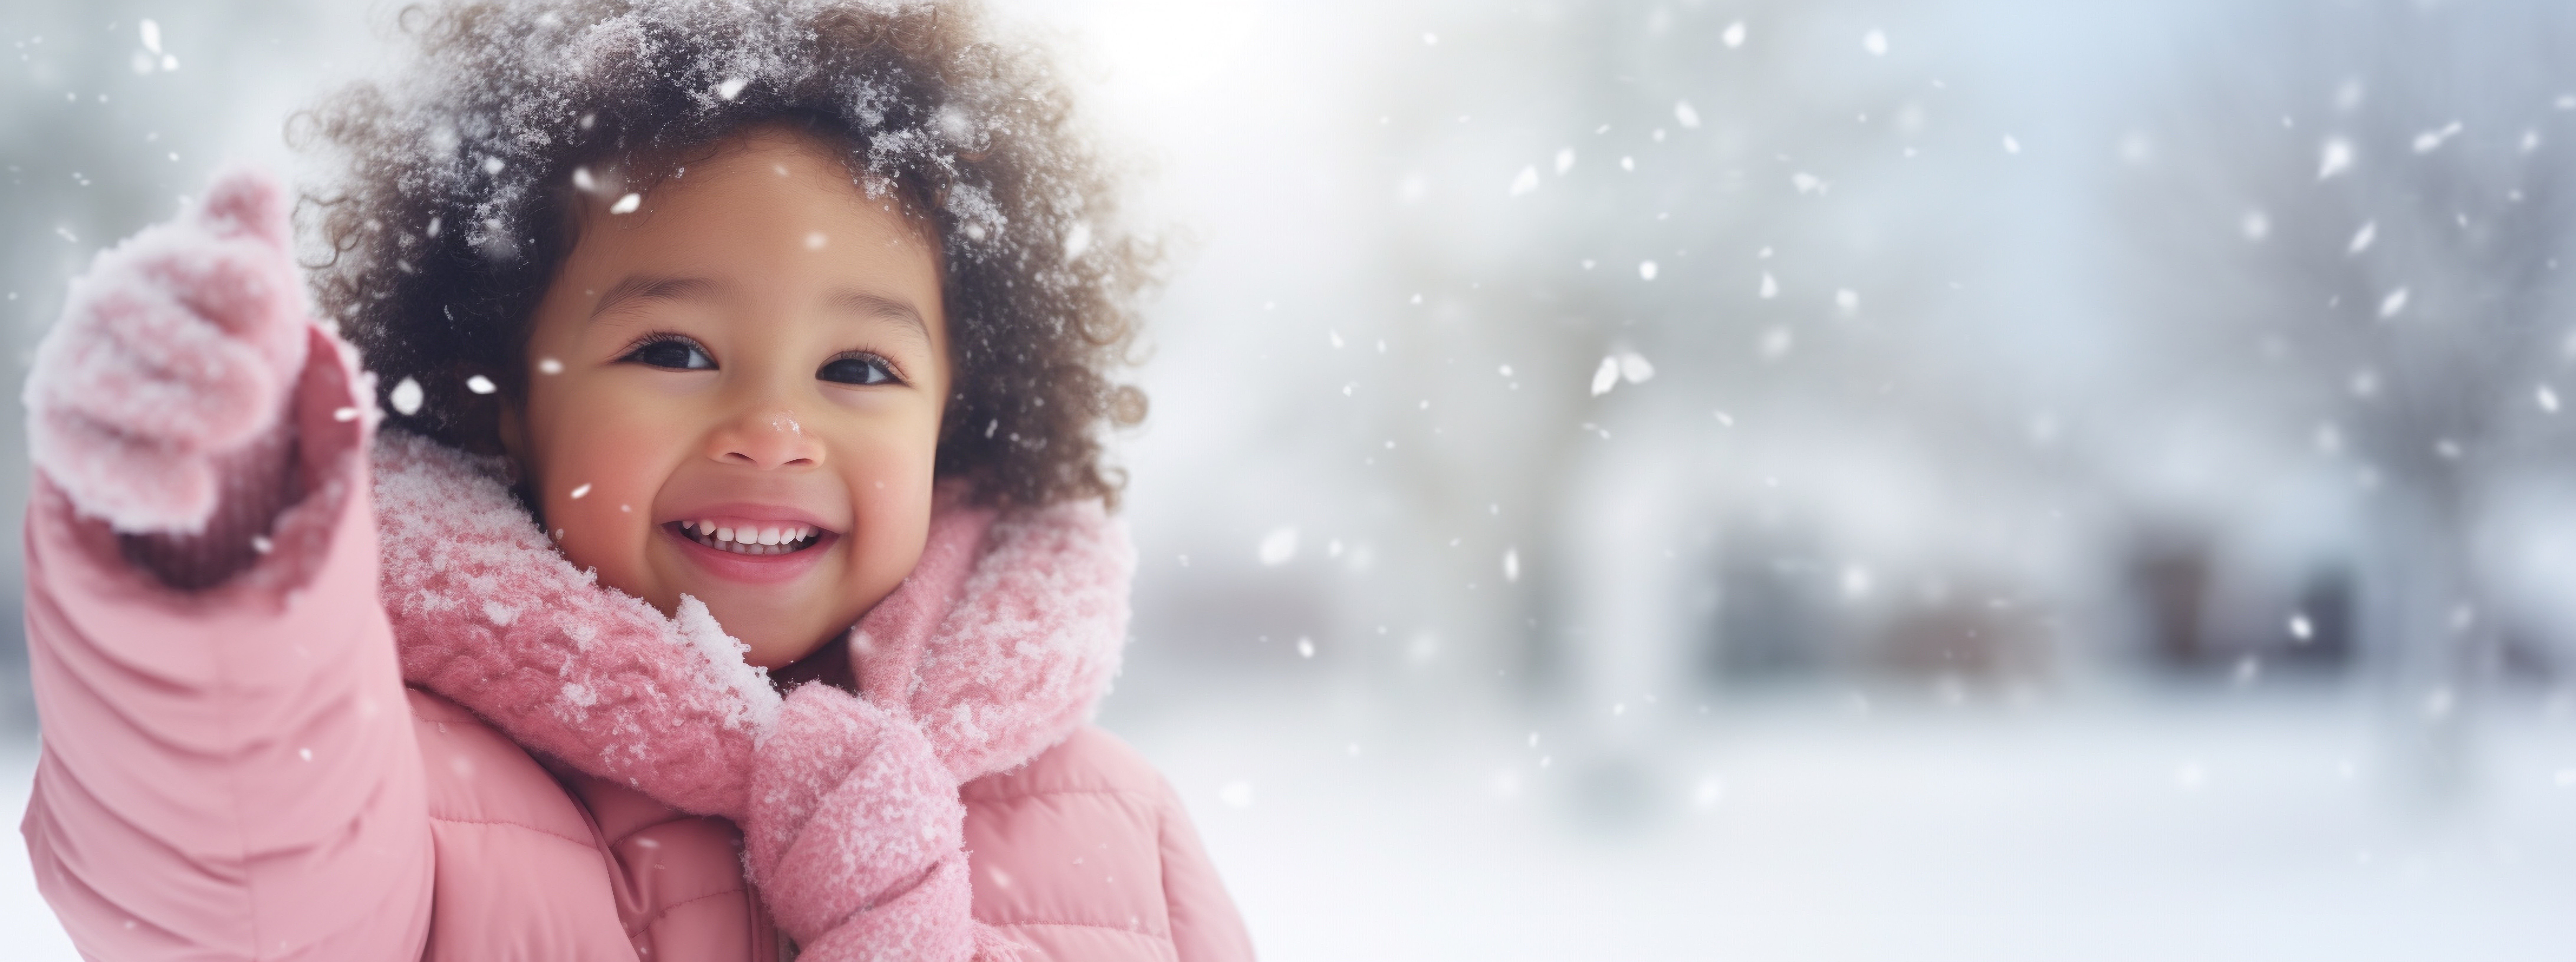 Super cute little girl wearing a pink snow suit surrounded by falling snowflakes and winter fun. 